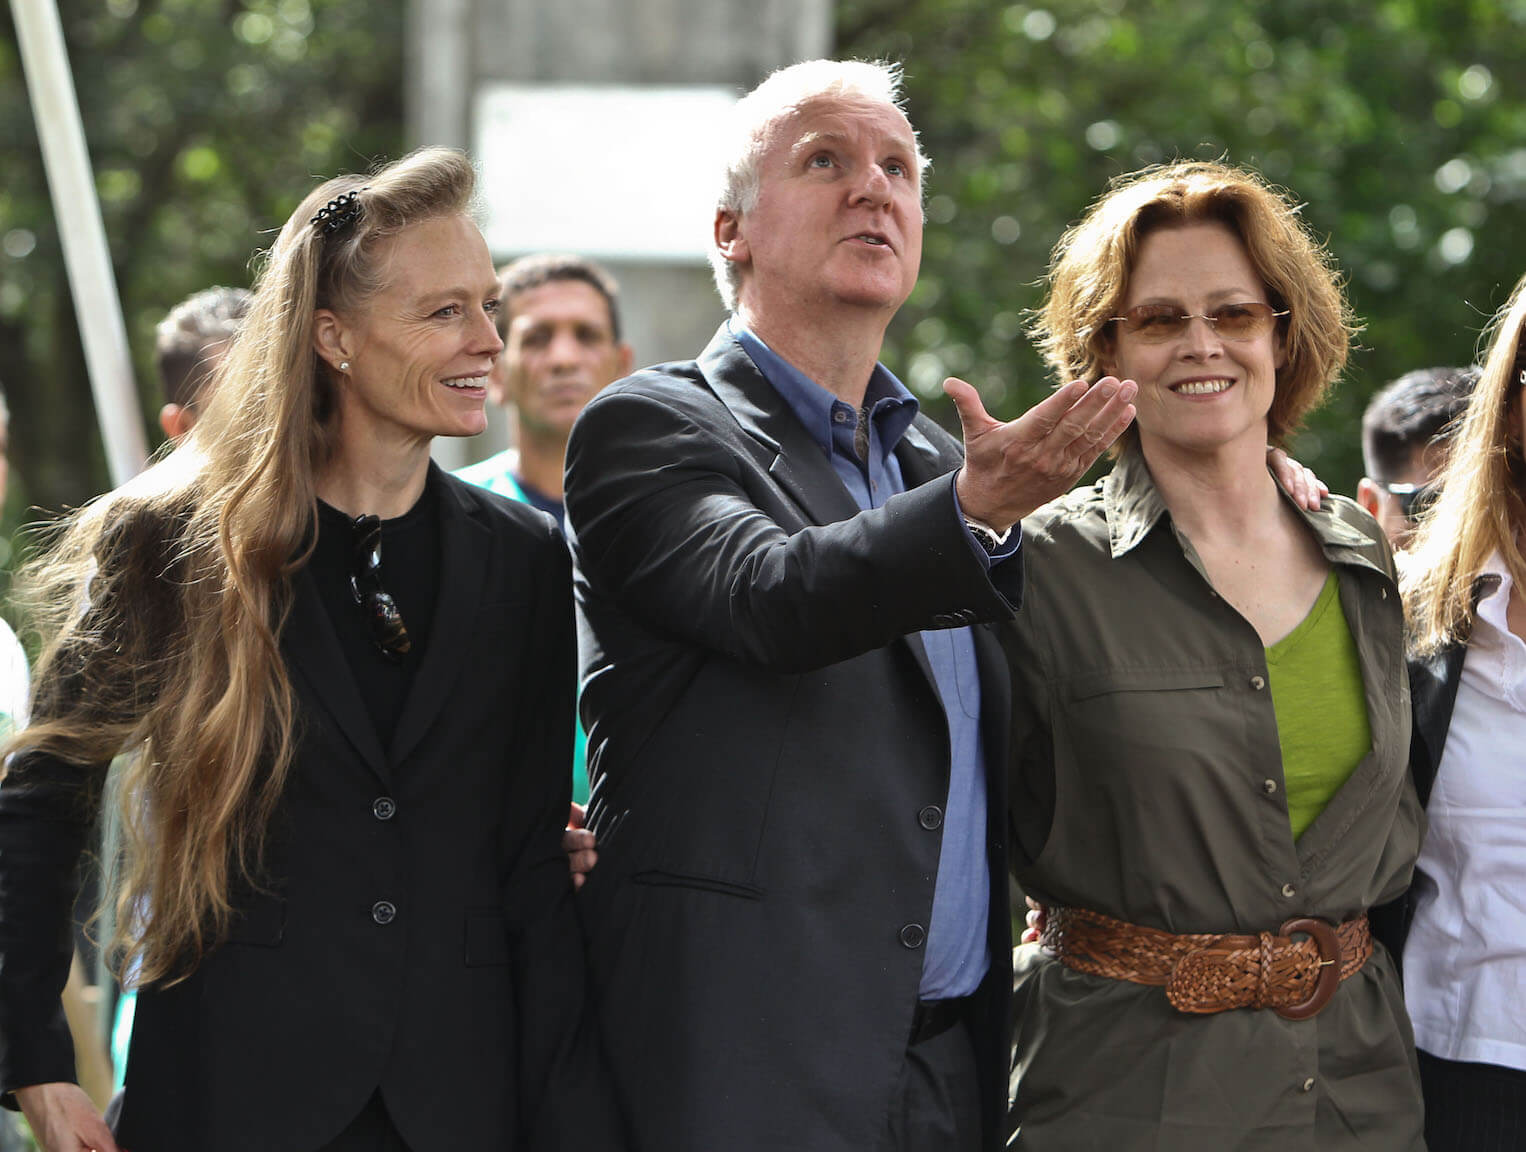 'Avatar 3' director James Cameron holding his hand out and looking at something above him with his wife, Suzy Amis, and actor Sigourney Weaver